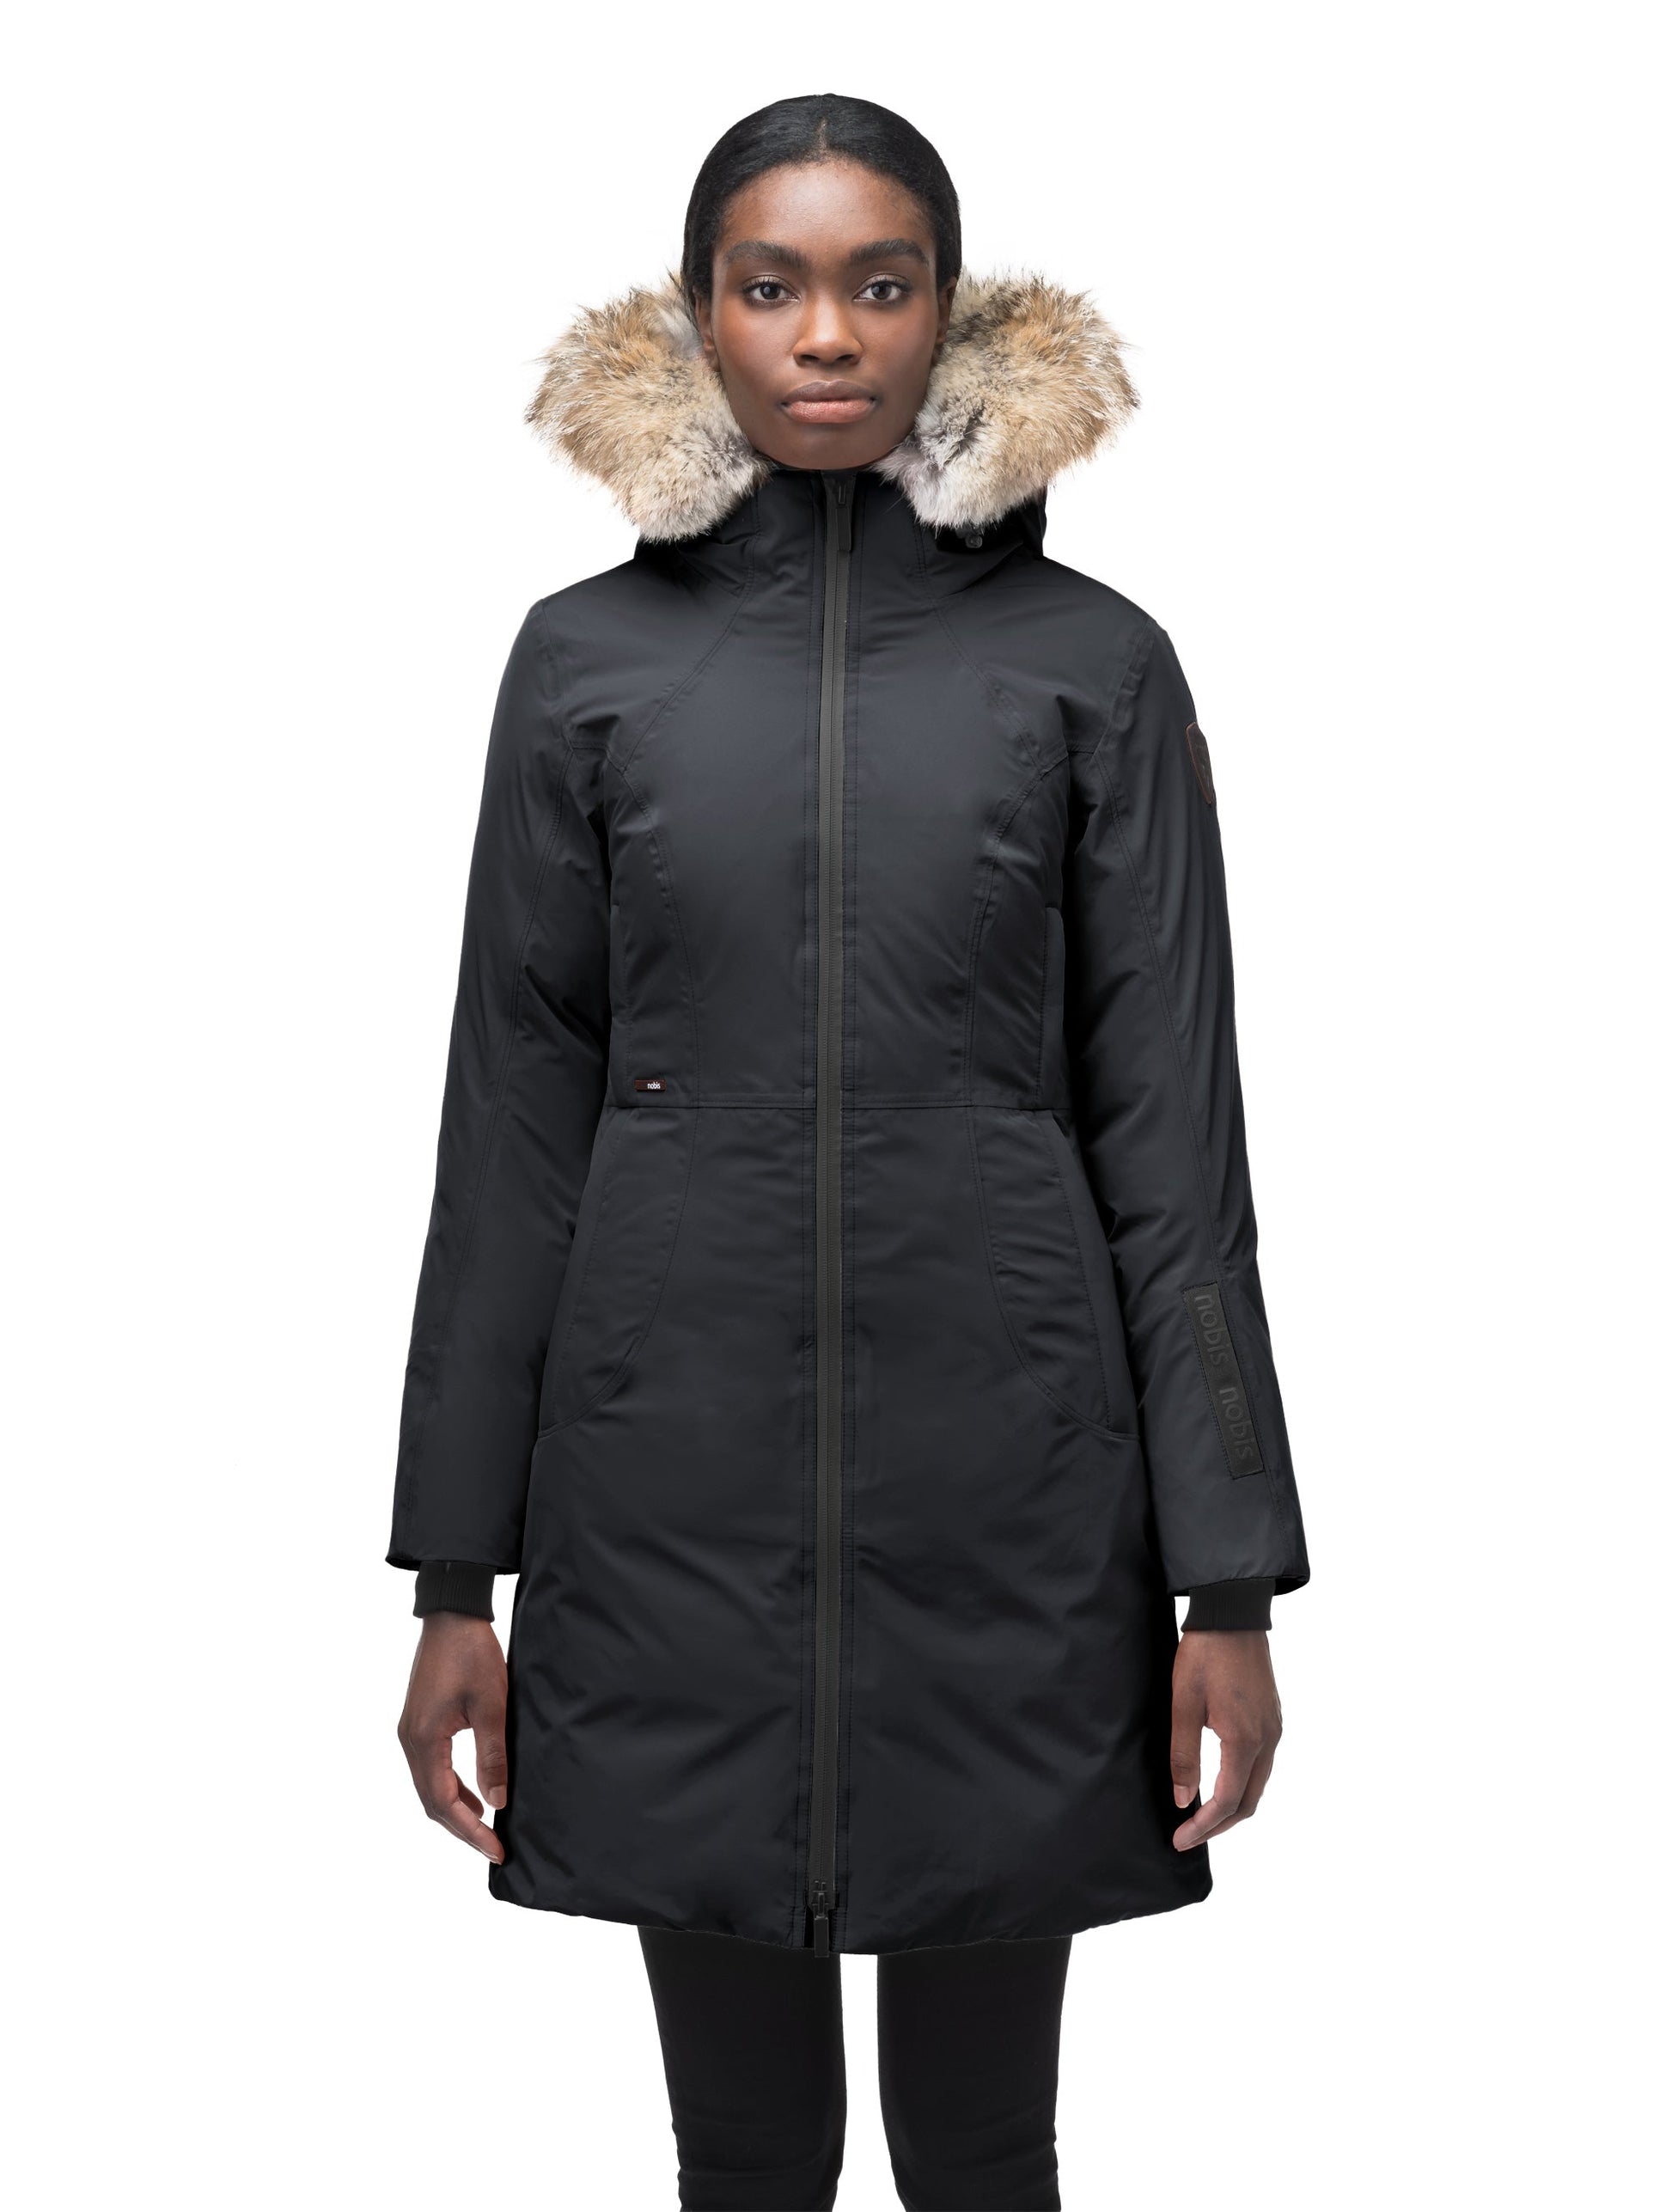 Ladies thigh length down-filled parka with non-removable hood and removable coyote fur trim in Black